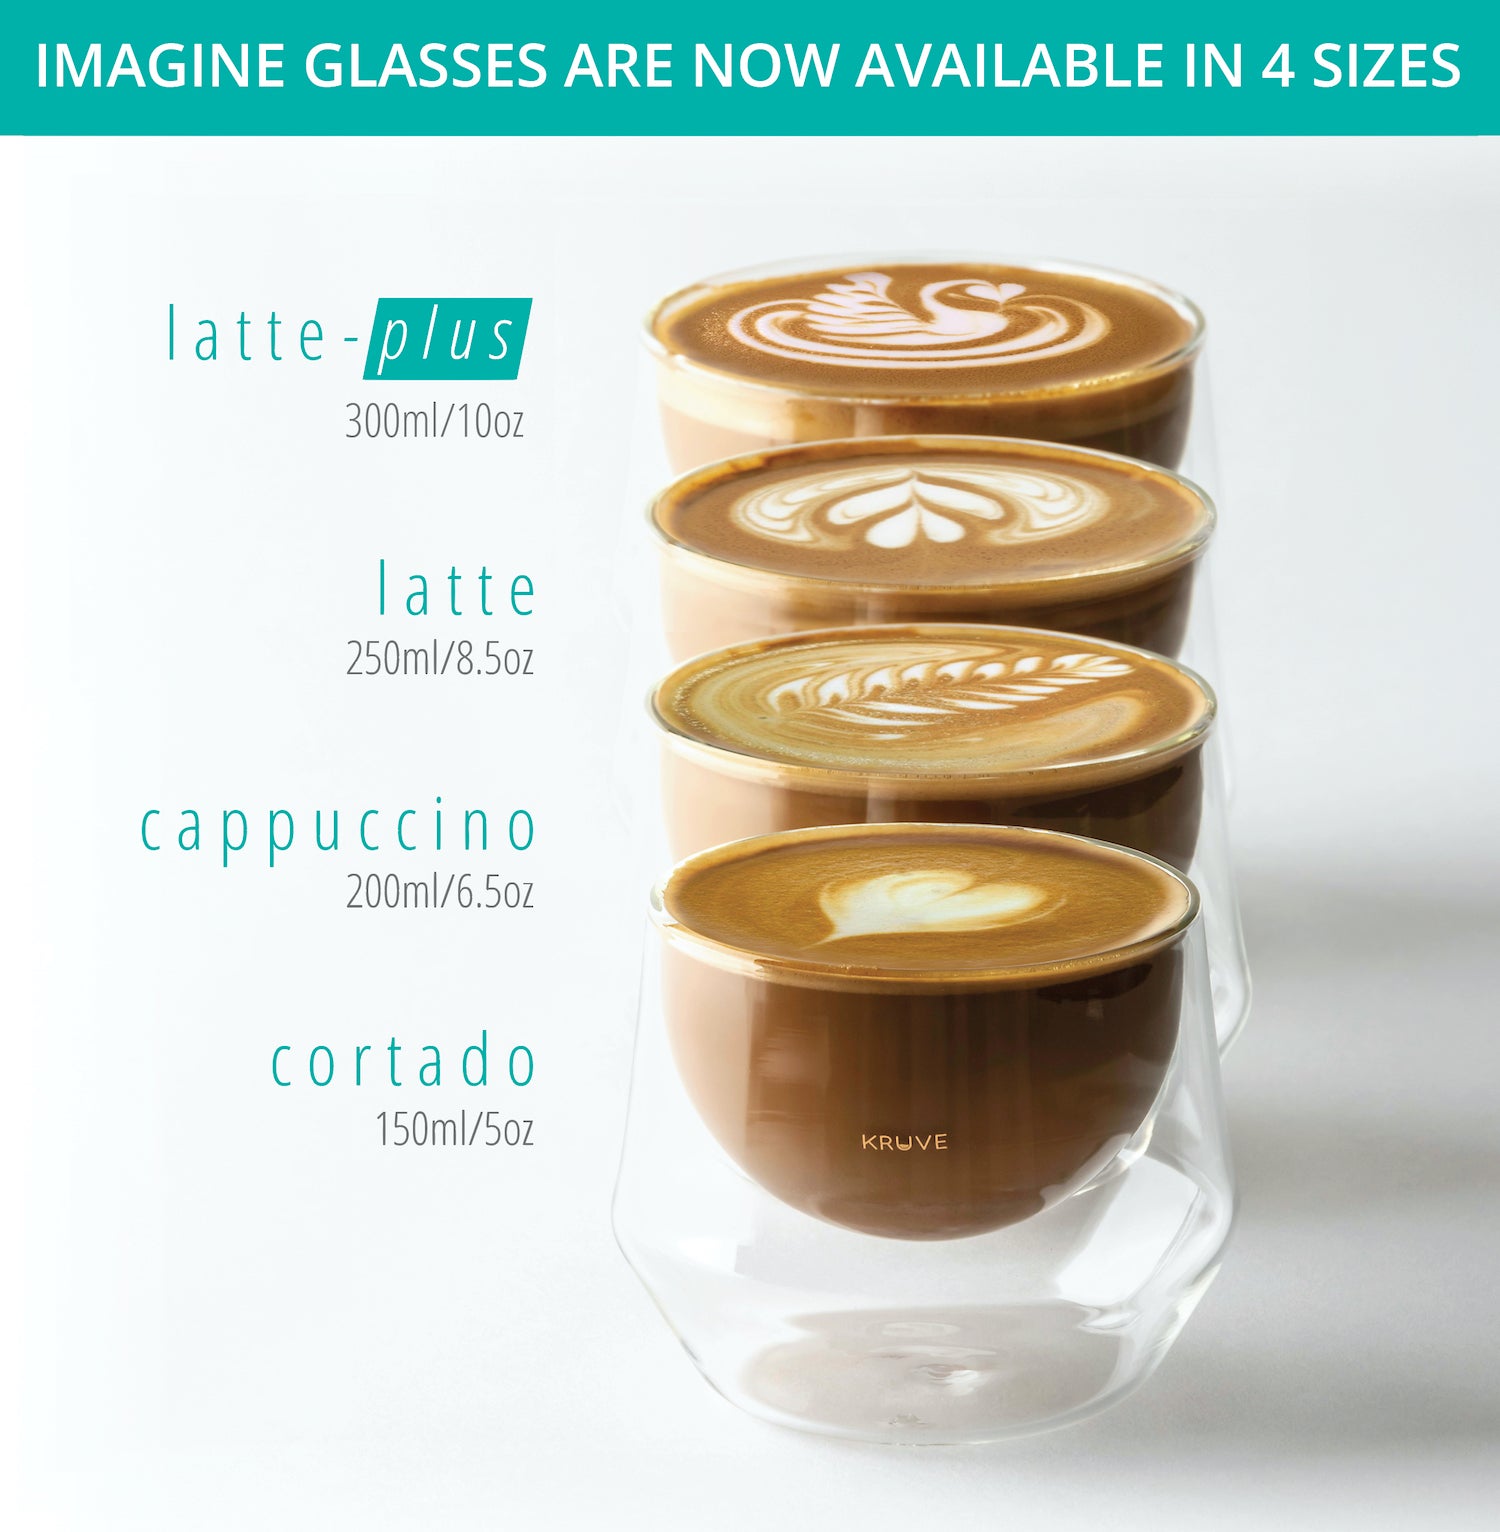 Got Milk? Introducing the new KRUVE IMAGINE glasses. Optimized for milk art  and come in 3 sizes. The perfect canvas. In stock and shipping…